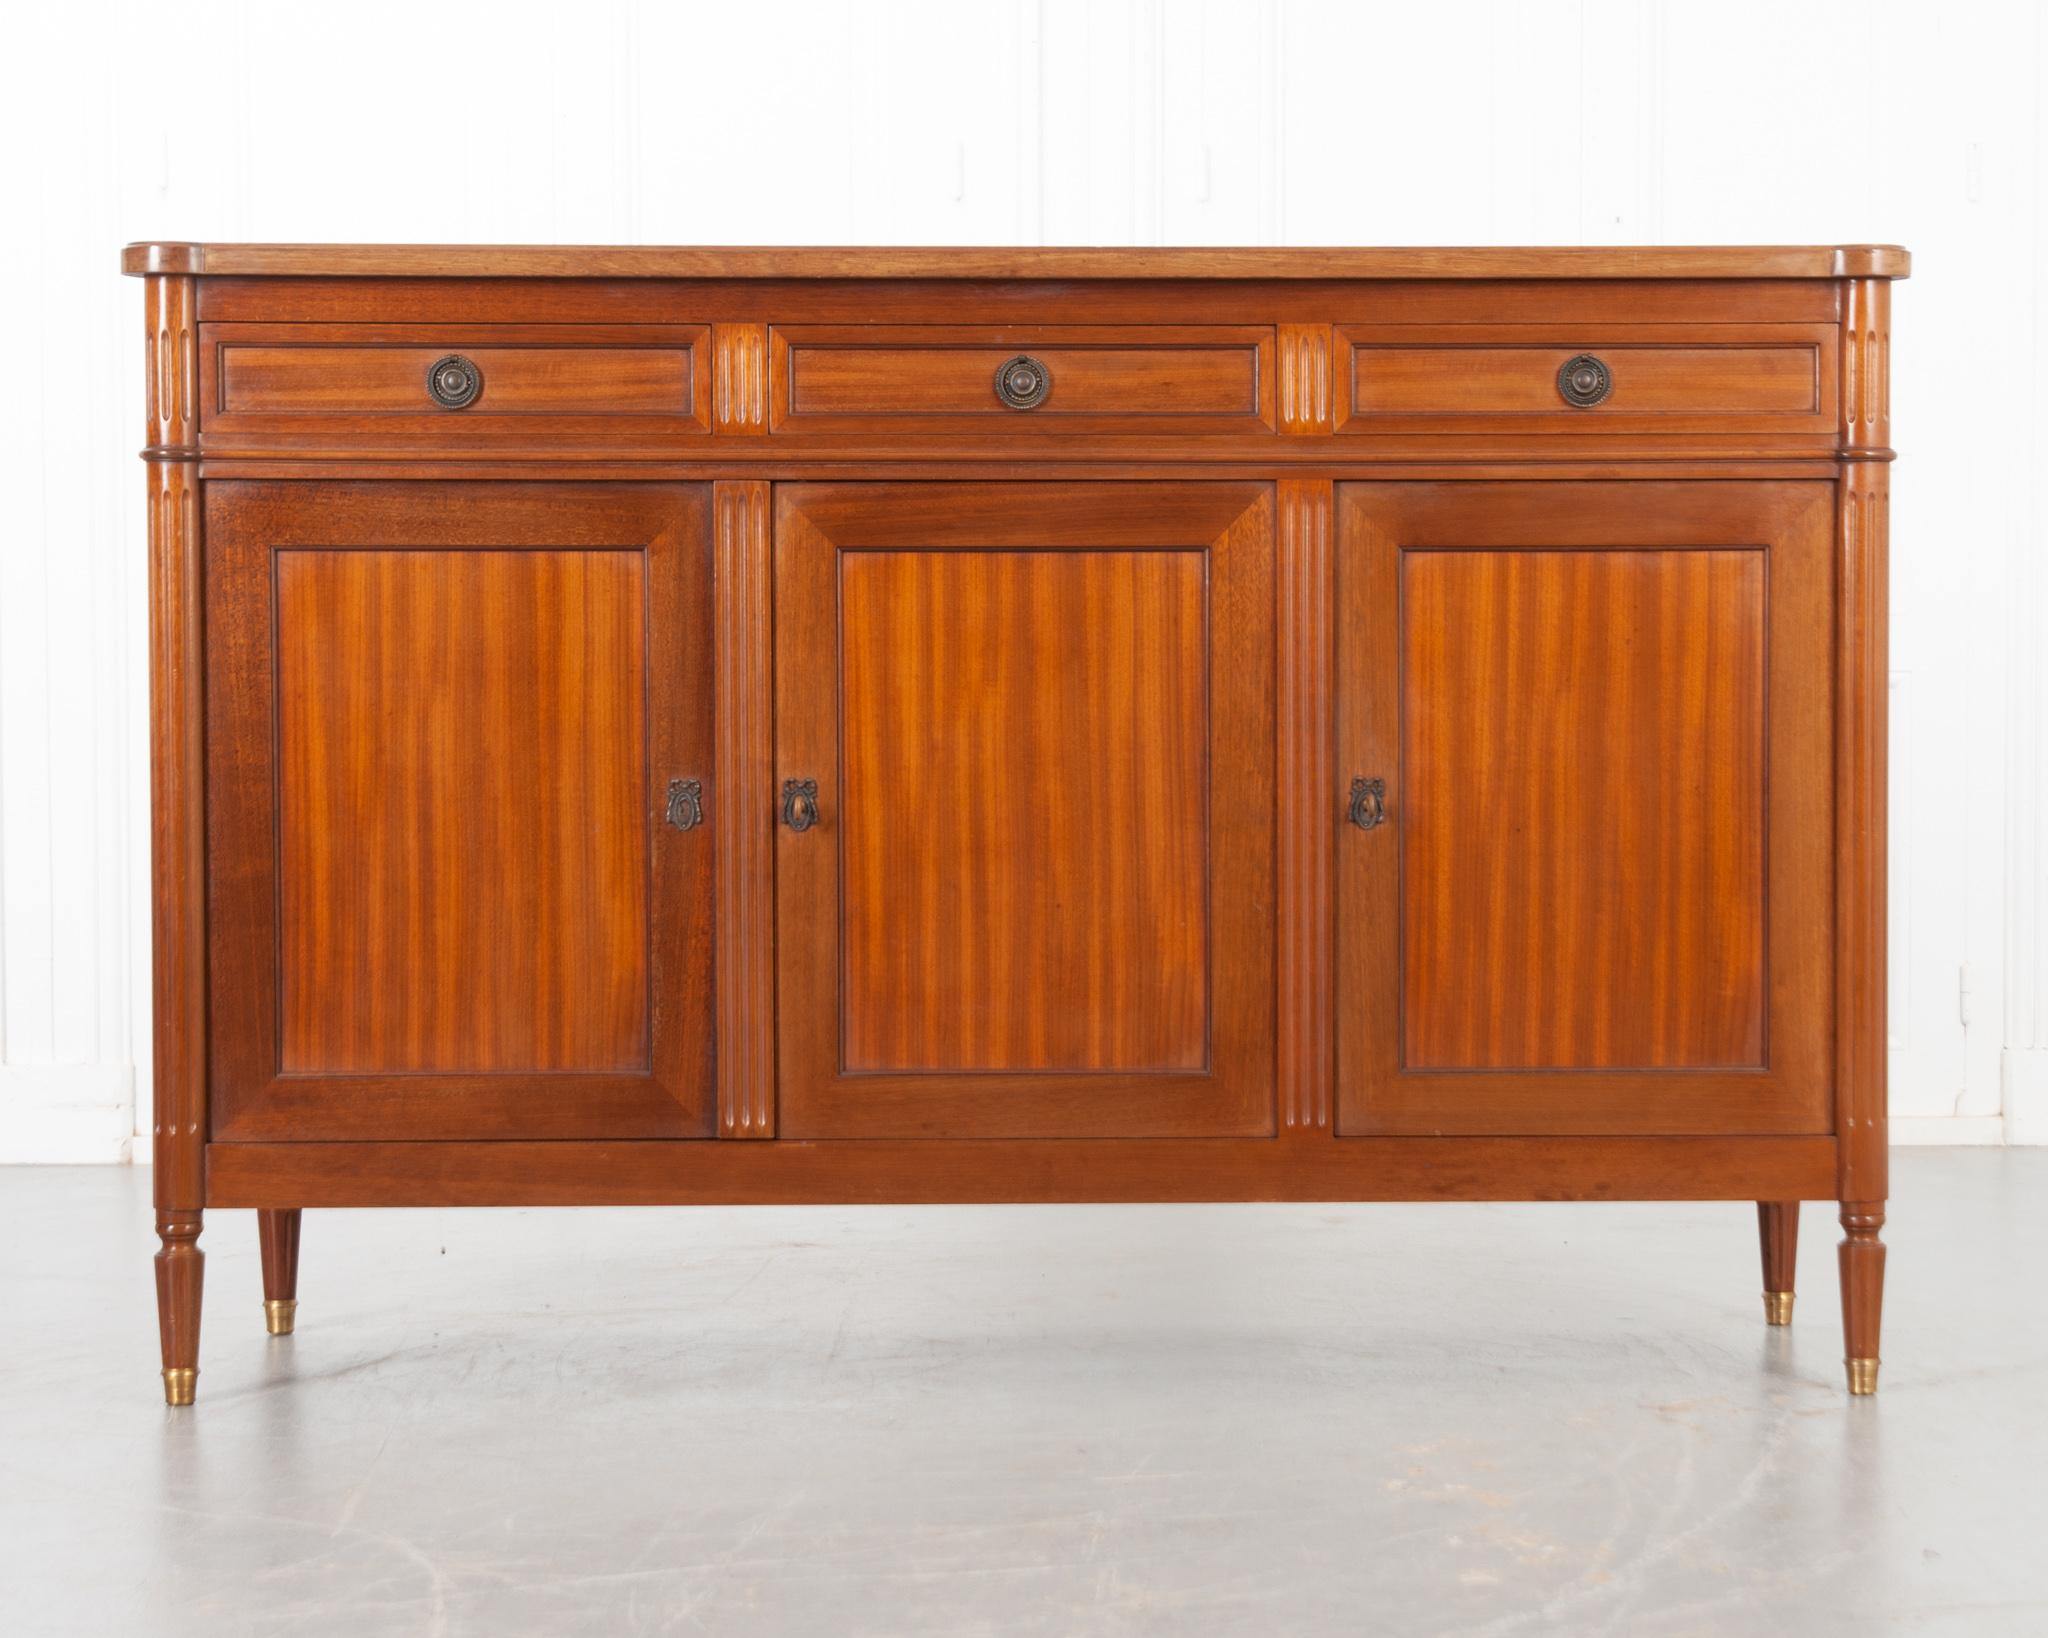 This French enfilade was crafted in the 1940's in the style of Louis XVI. A wonderfully patinated mahogany top with tureted corners that continue to the body as fluted pilasters. The apron houses three paneled drawers with matching drop ring brass